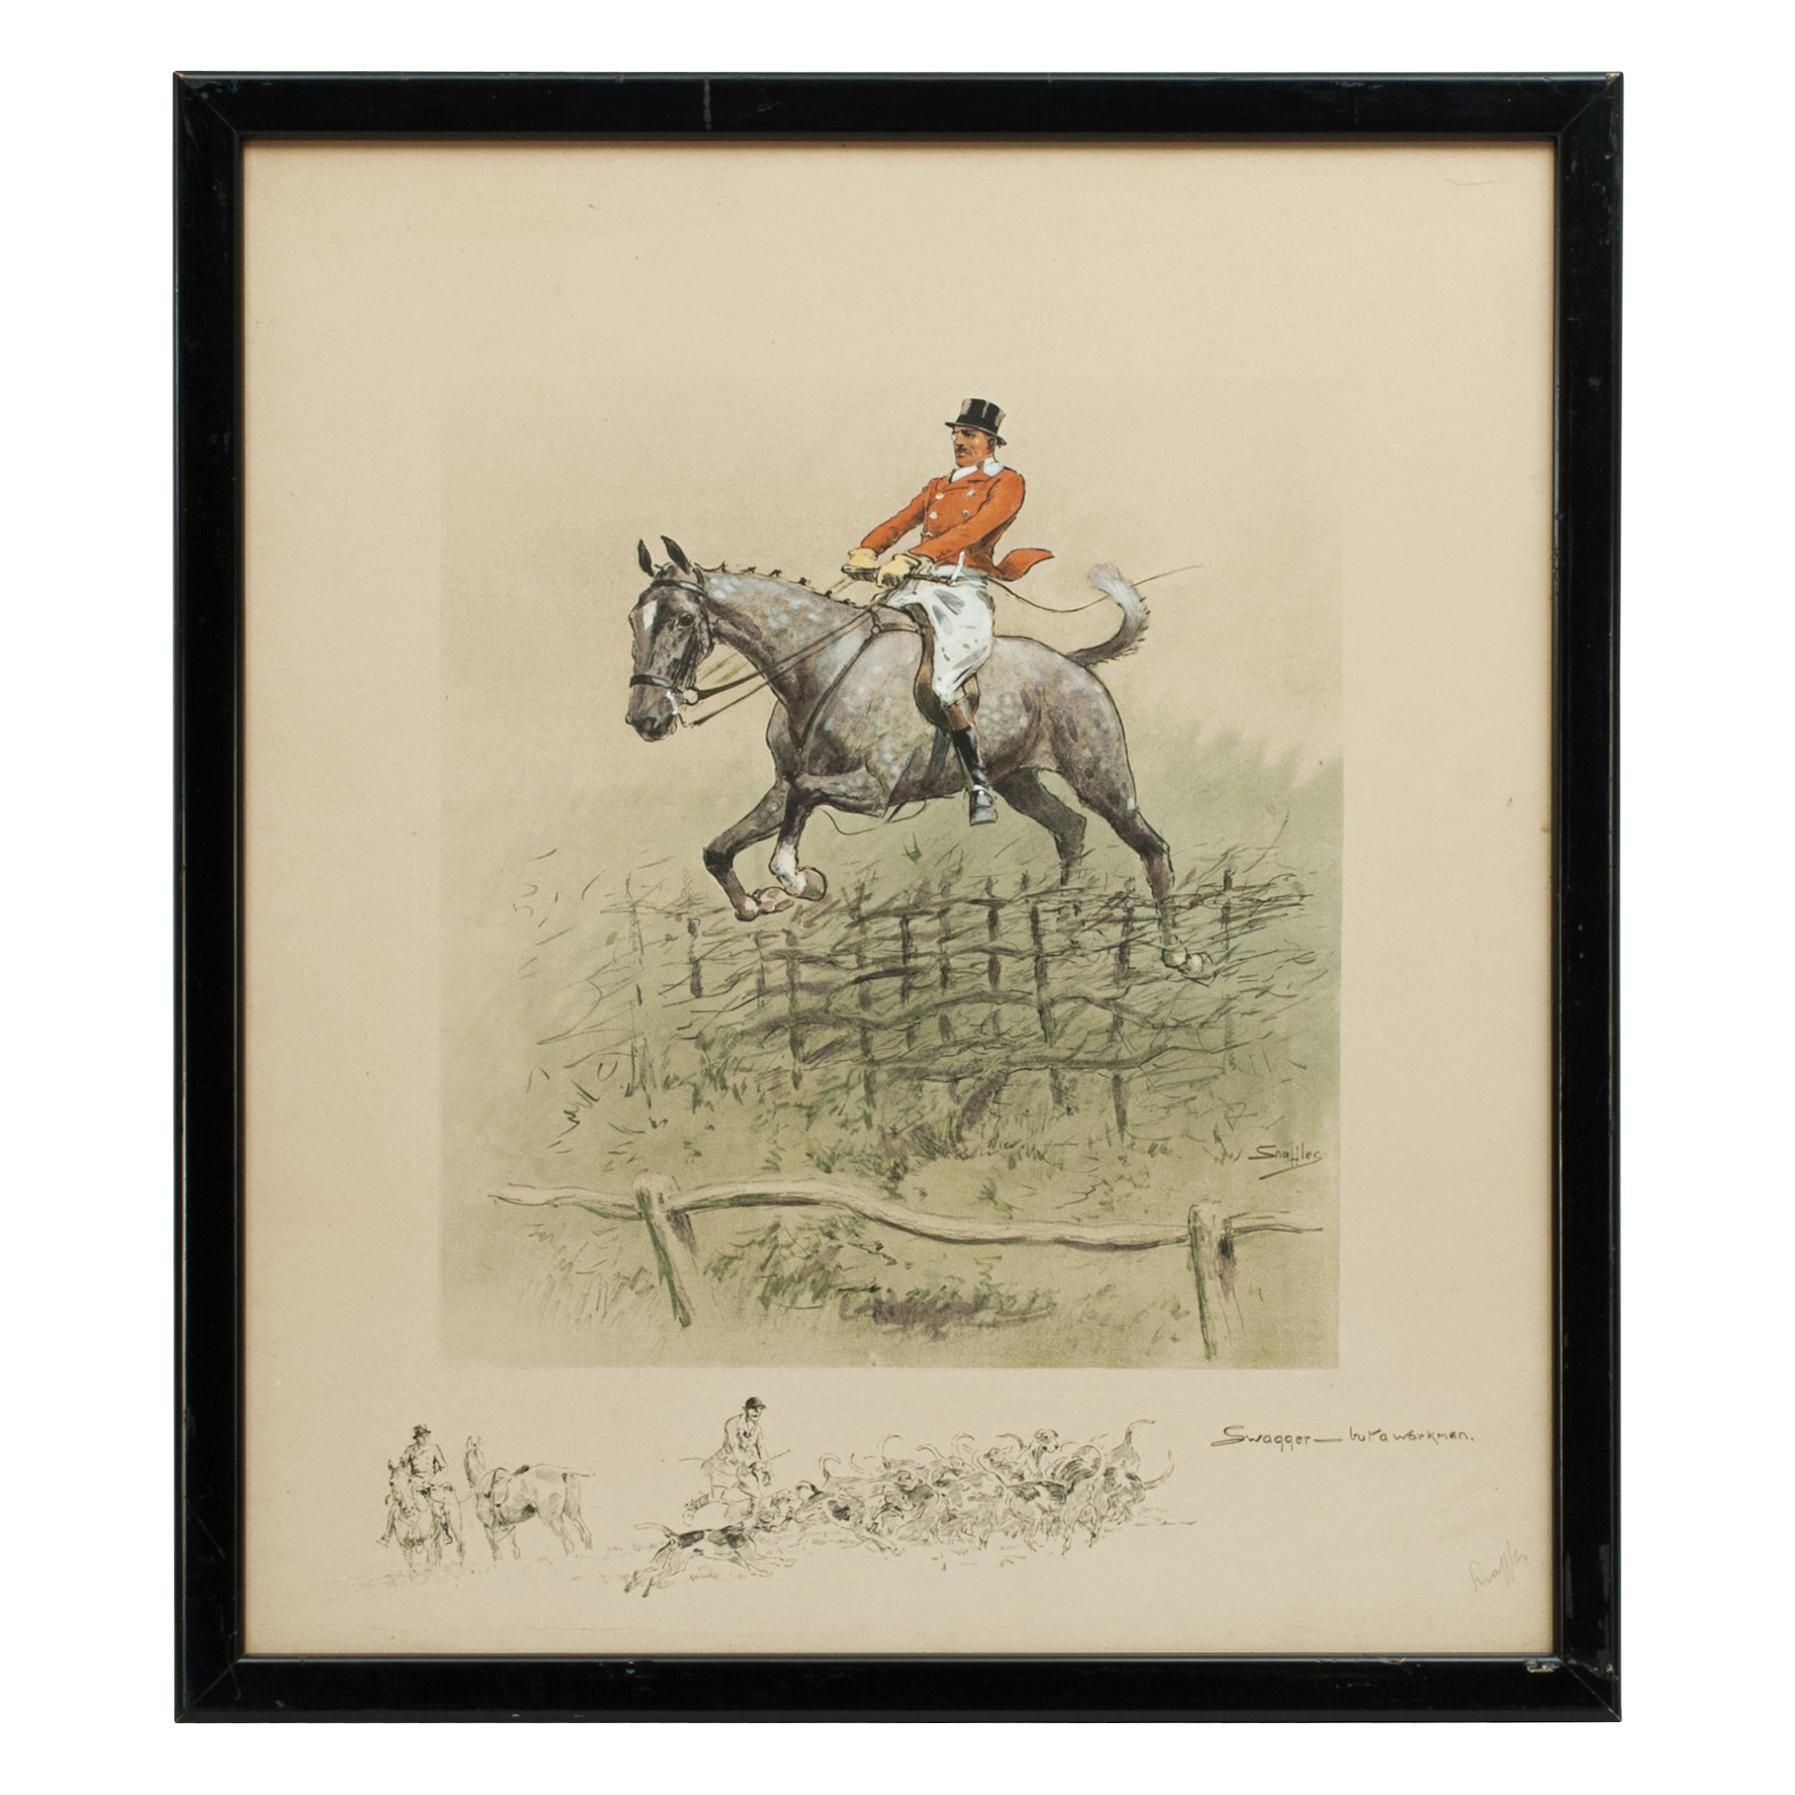 Vintage, Snaffles Fox Hunting Print, Swagger, Signed by the Artist, Charles John